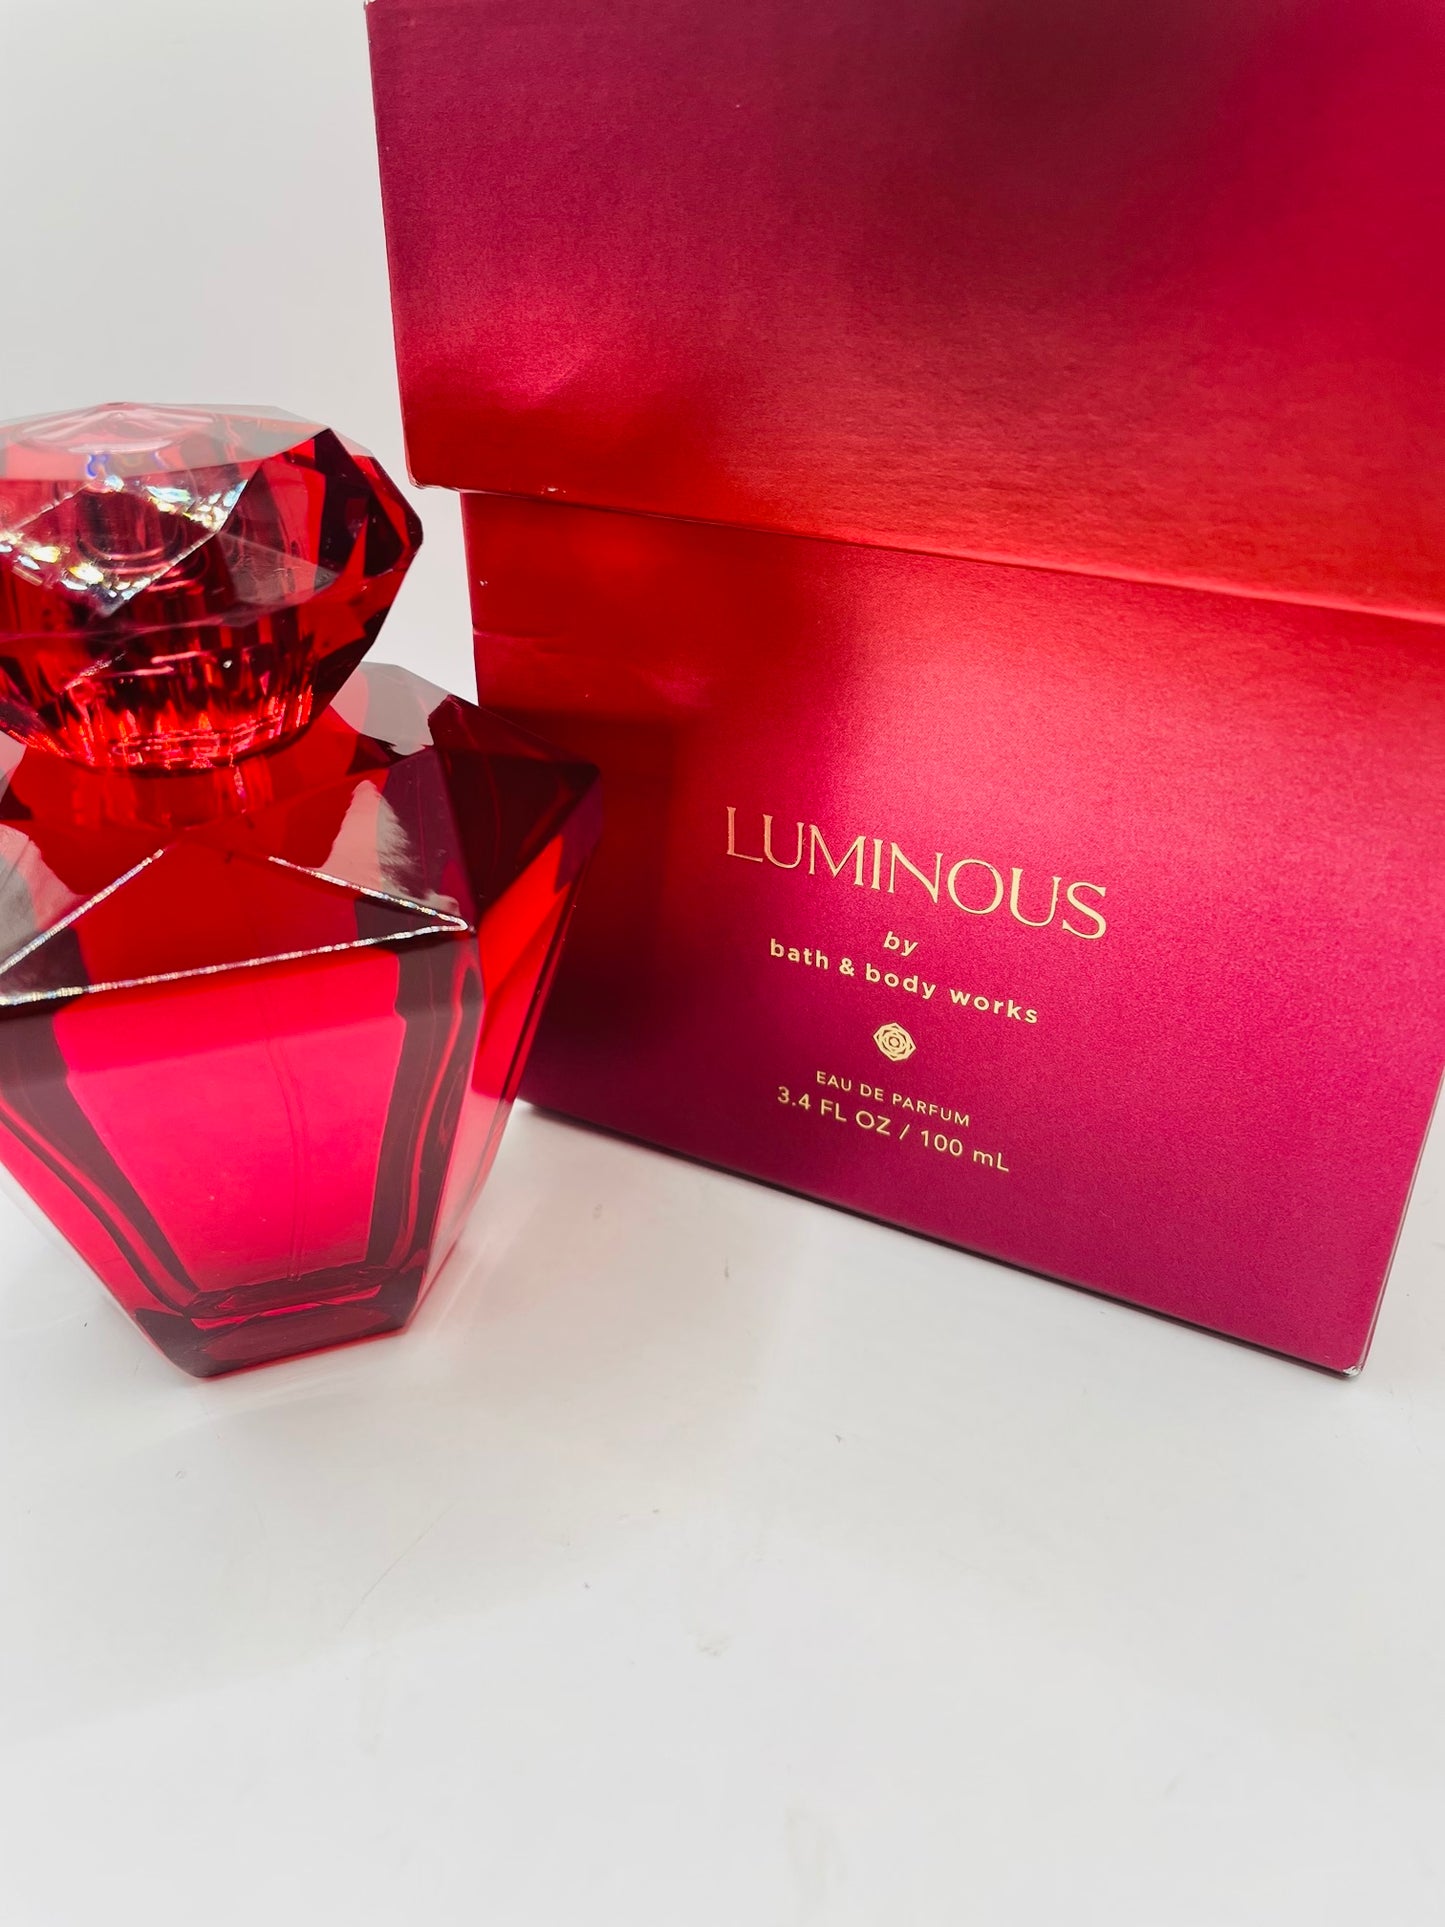 Luminous by bath and body works